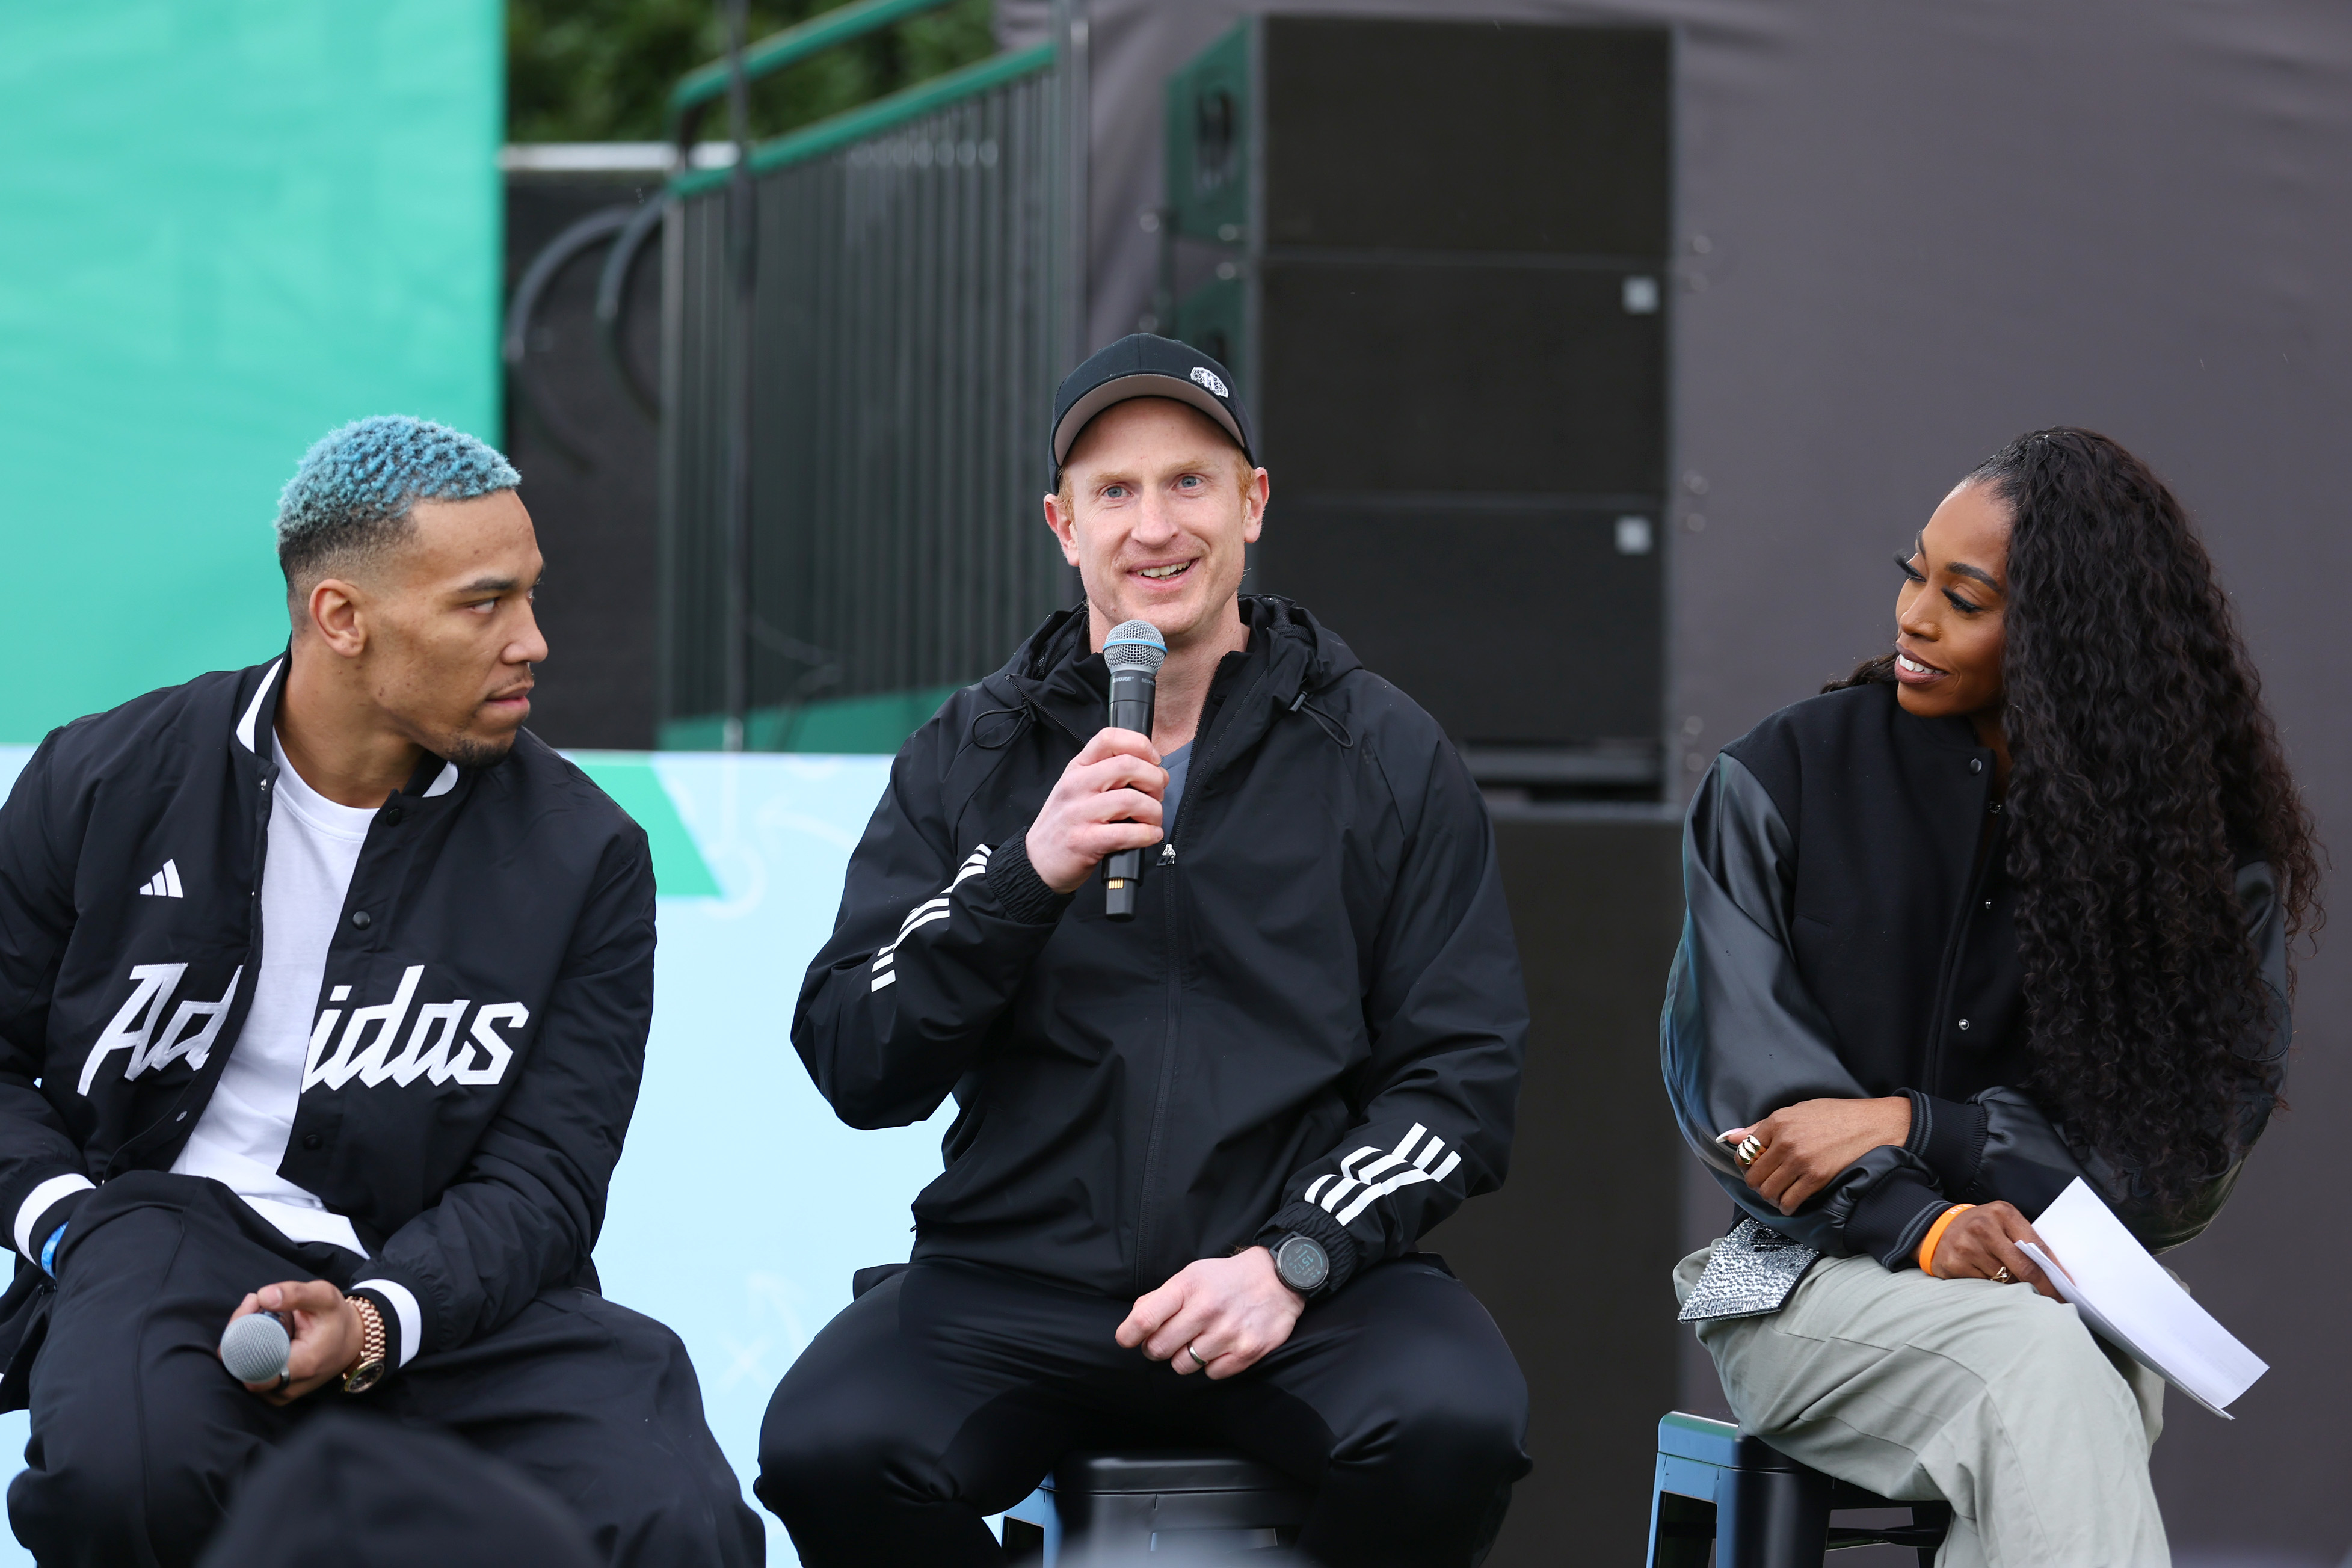 Three people in sportswear sitting and talking, one holding a microphone; outdoors, possibly at a sports event